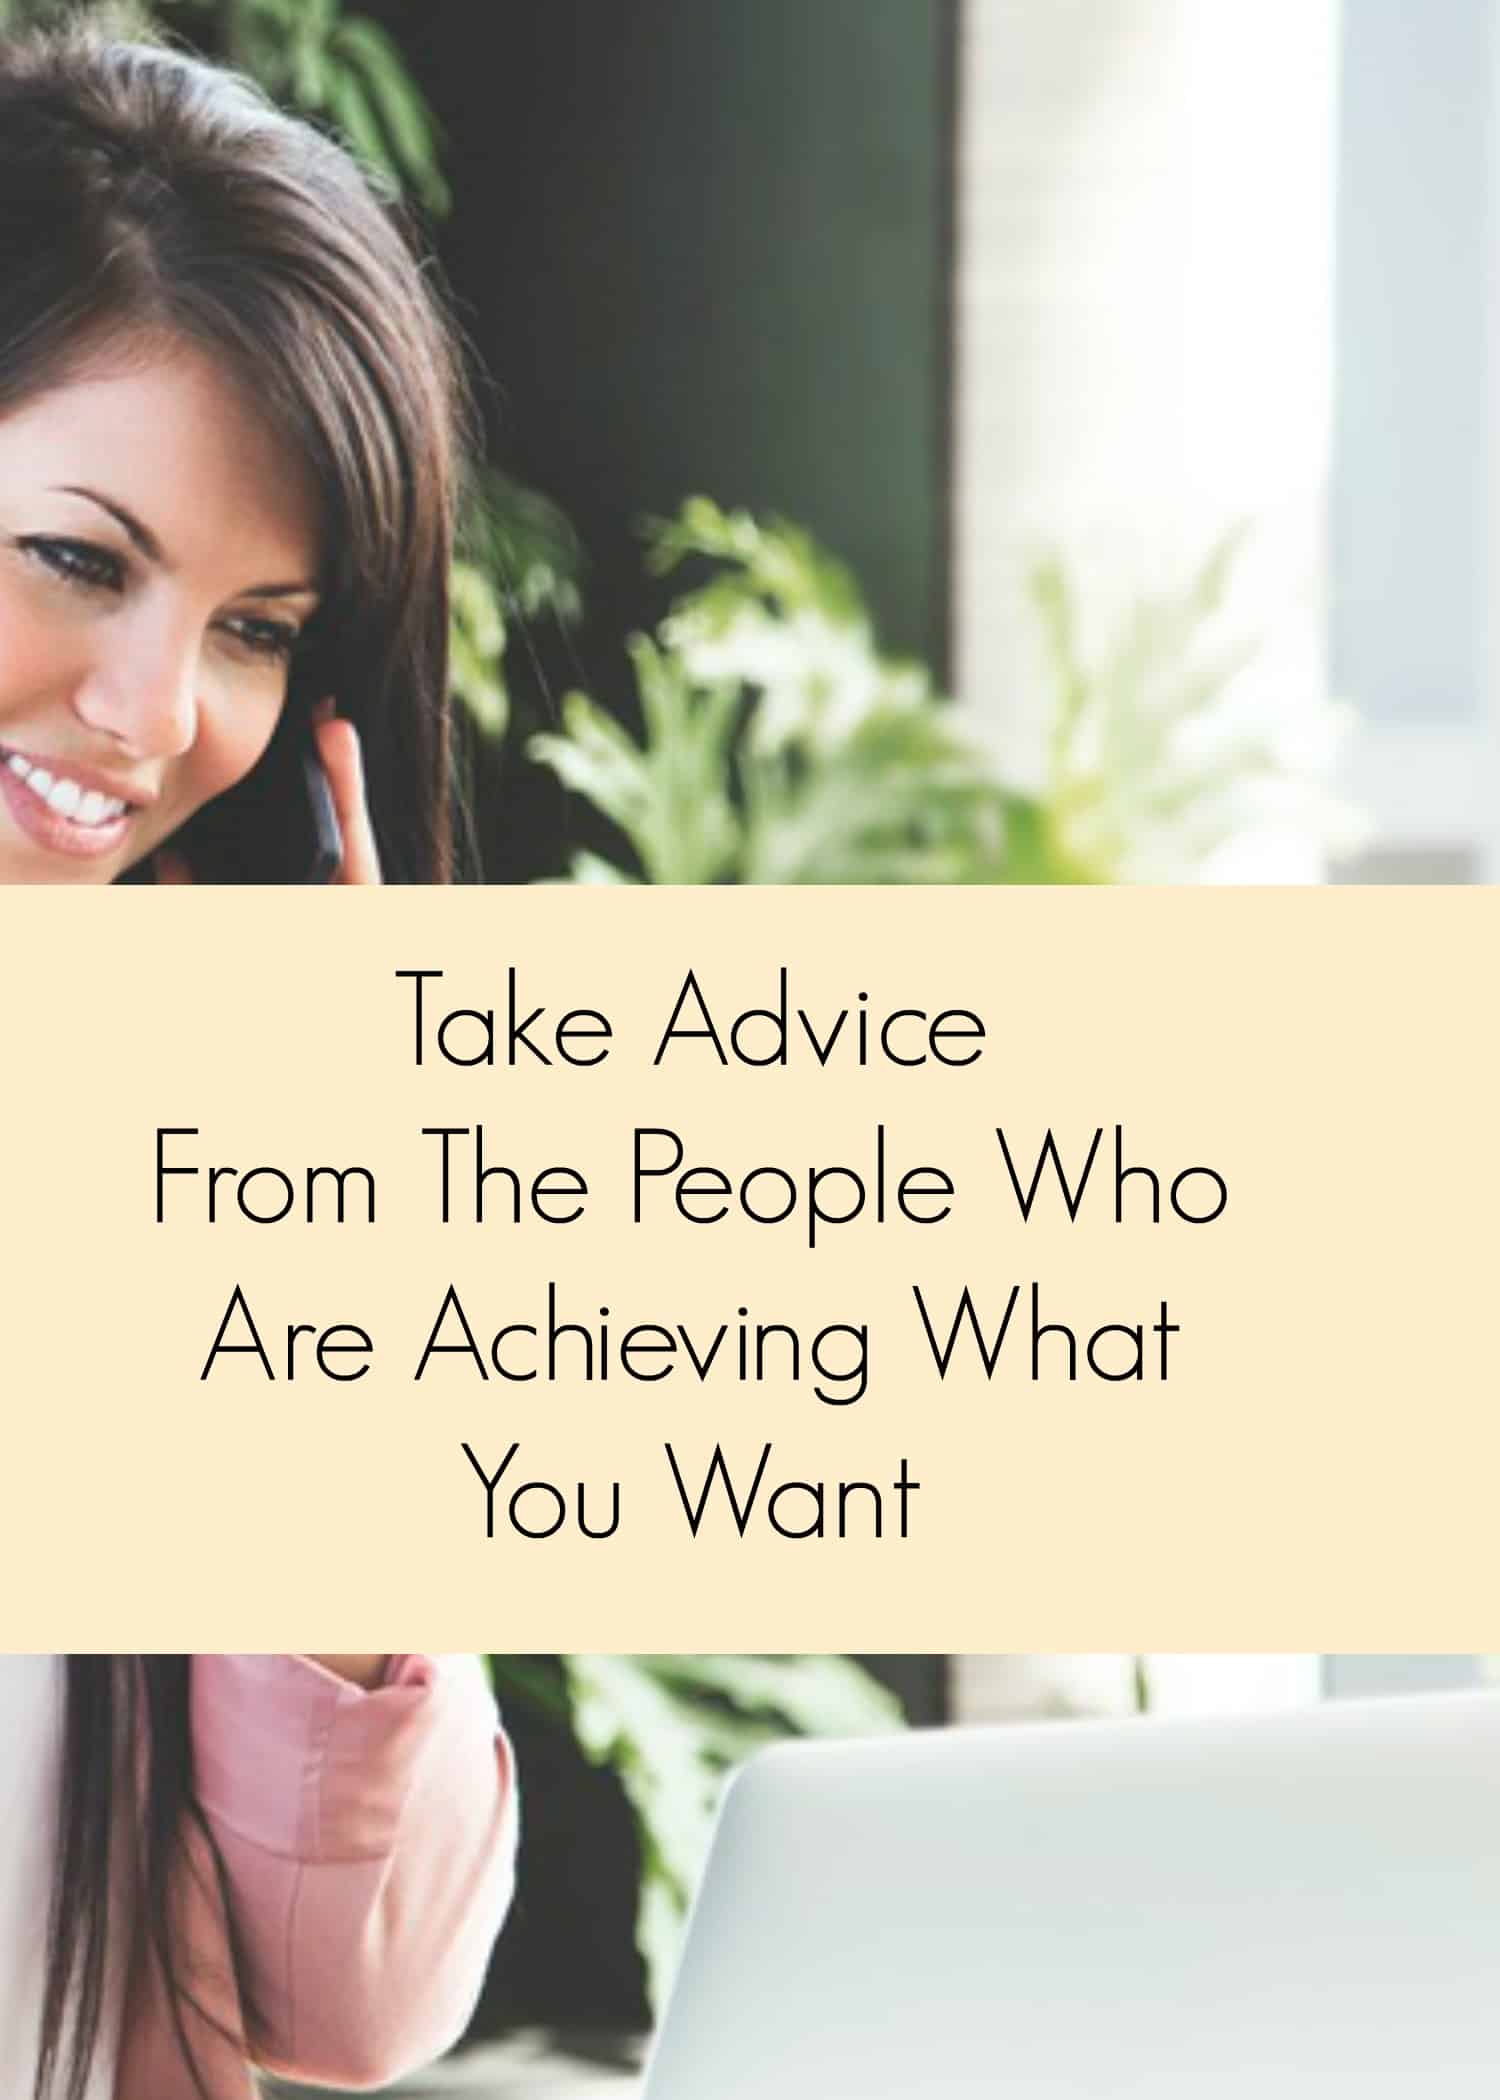 Take advice from people who are achieving what you want